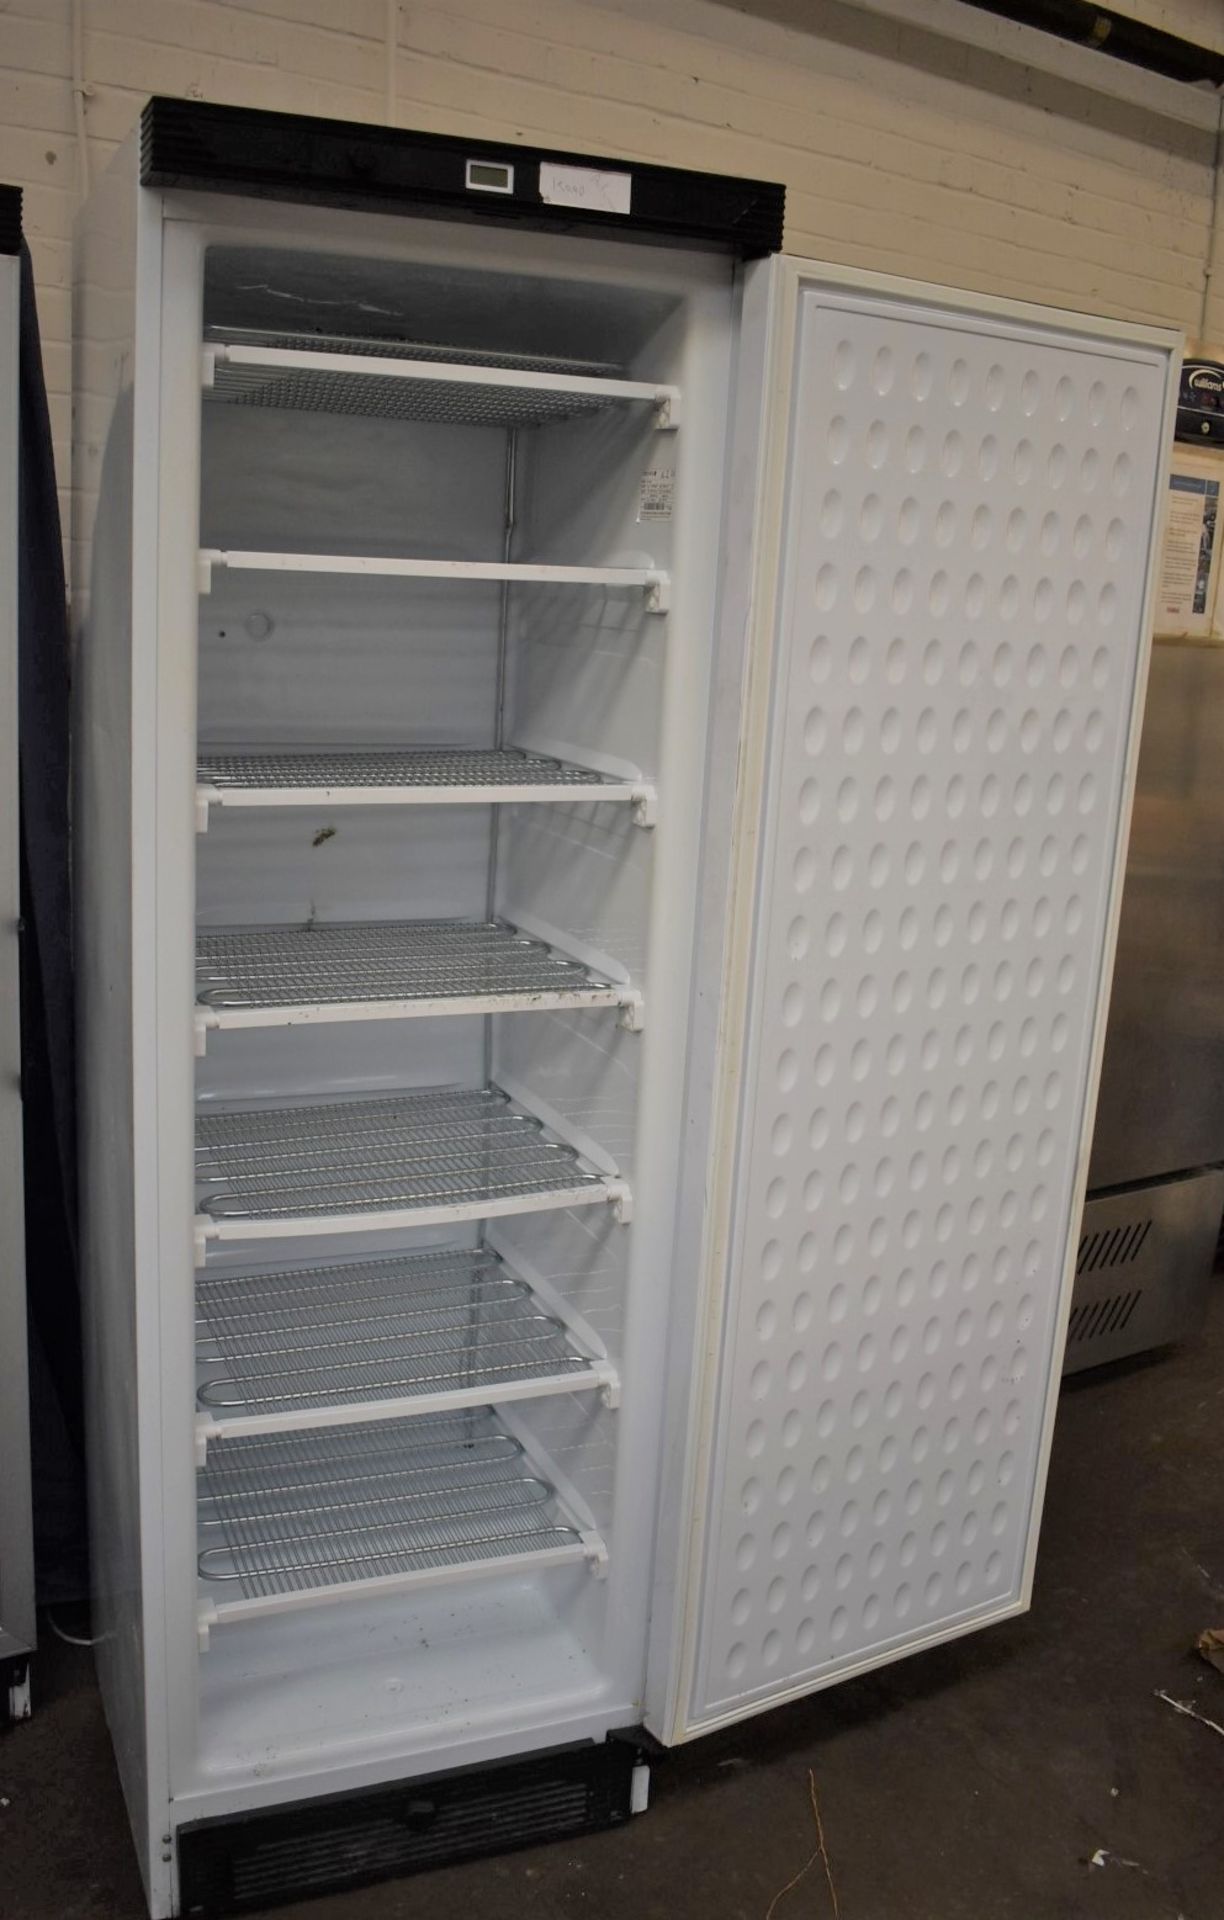 1 x Tefcold UF1380 Upright Commercial Freezer - RRP £800 - CL011 - Ref GCA516 WH5 - Location: